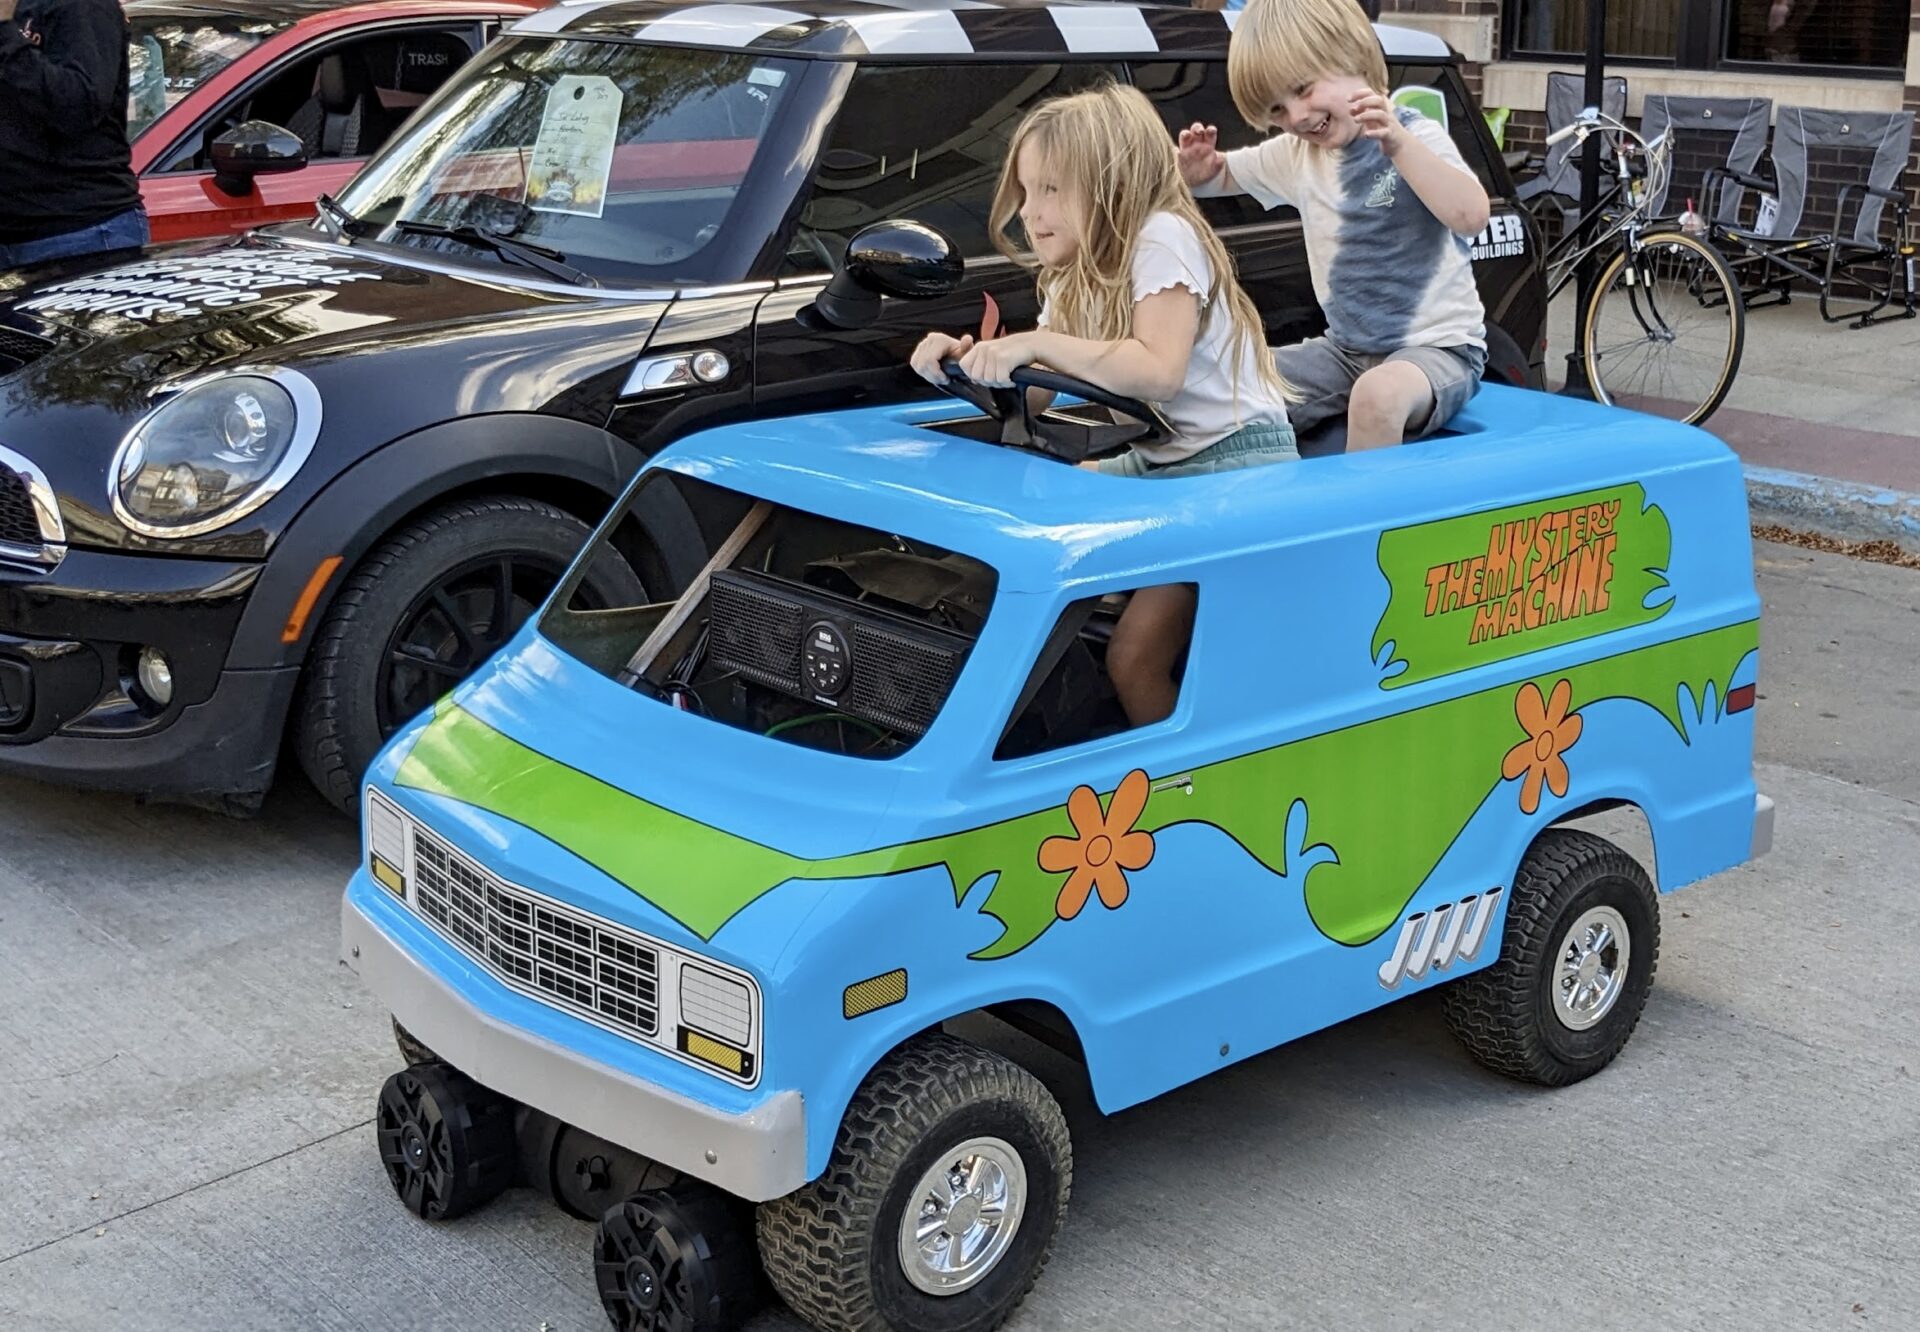 Kids enjoyed a miniature version of Scooby Doo's Mystery Machine during Sizzlin' Summer Nights downtown on Saturday, Aug. 26. Aberdeen Insider photo by Scott Waltman